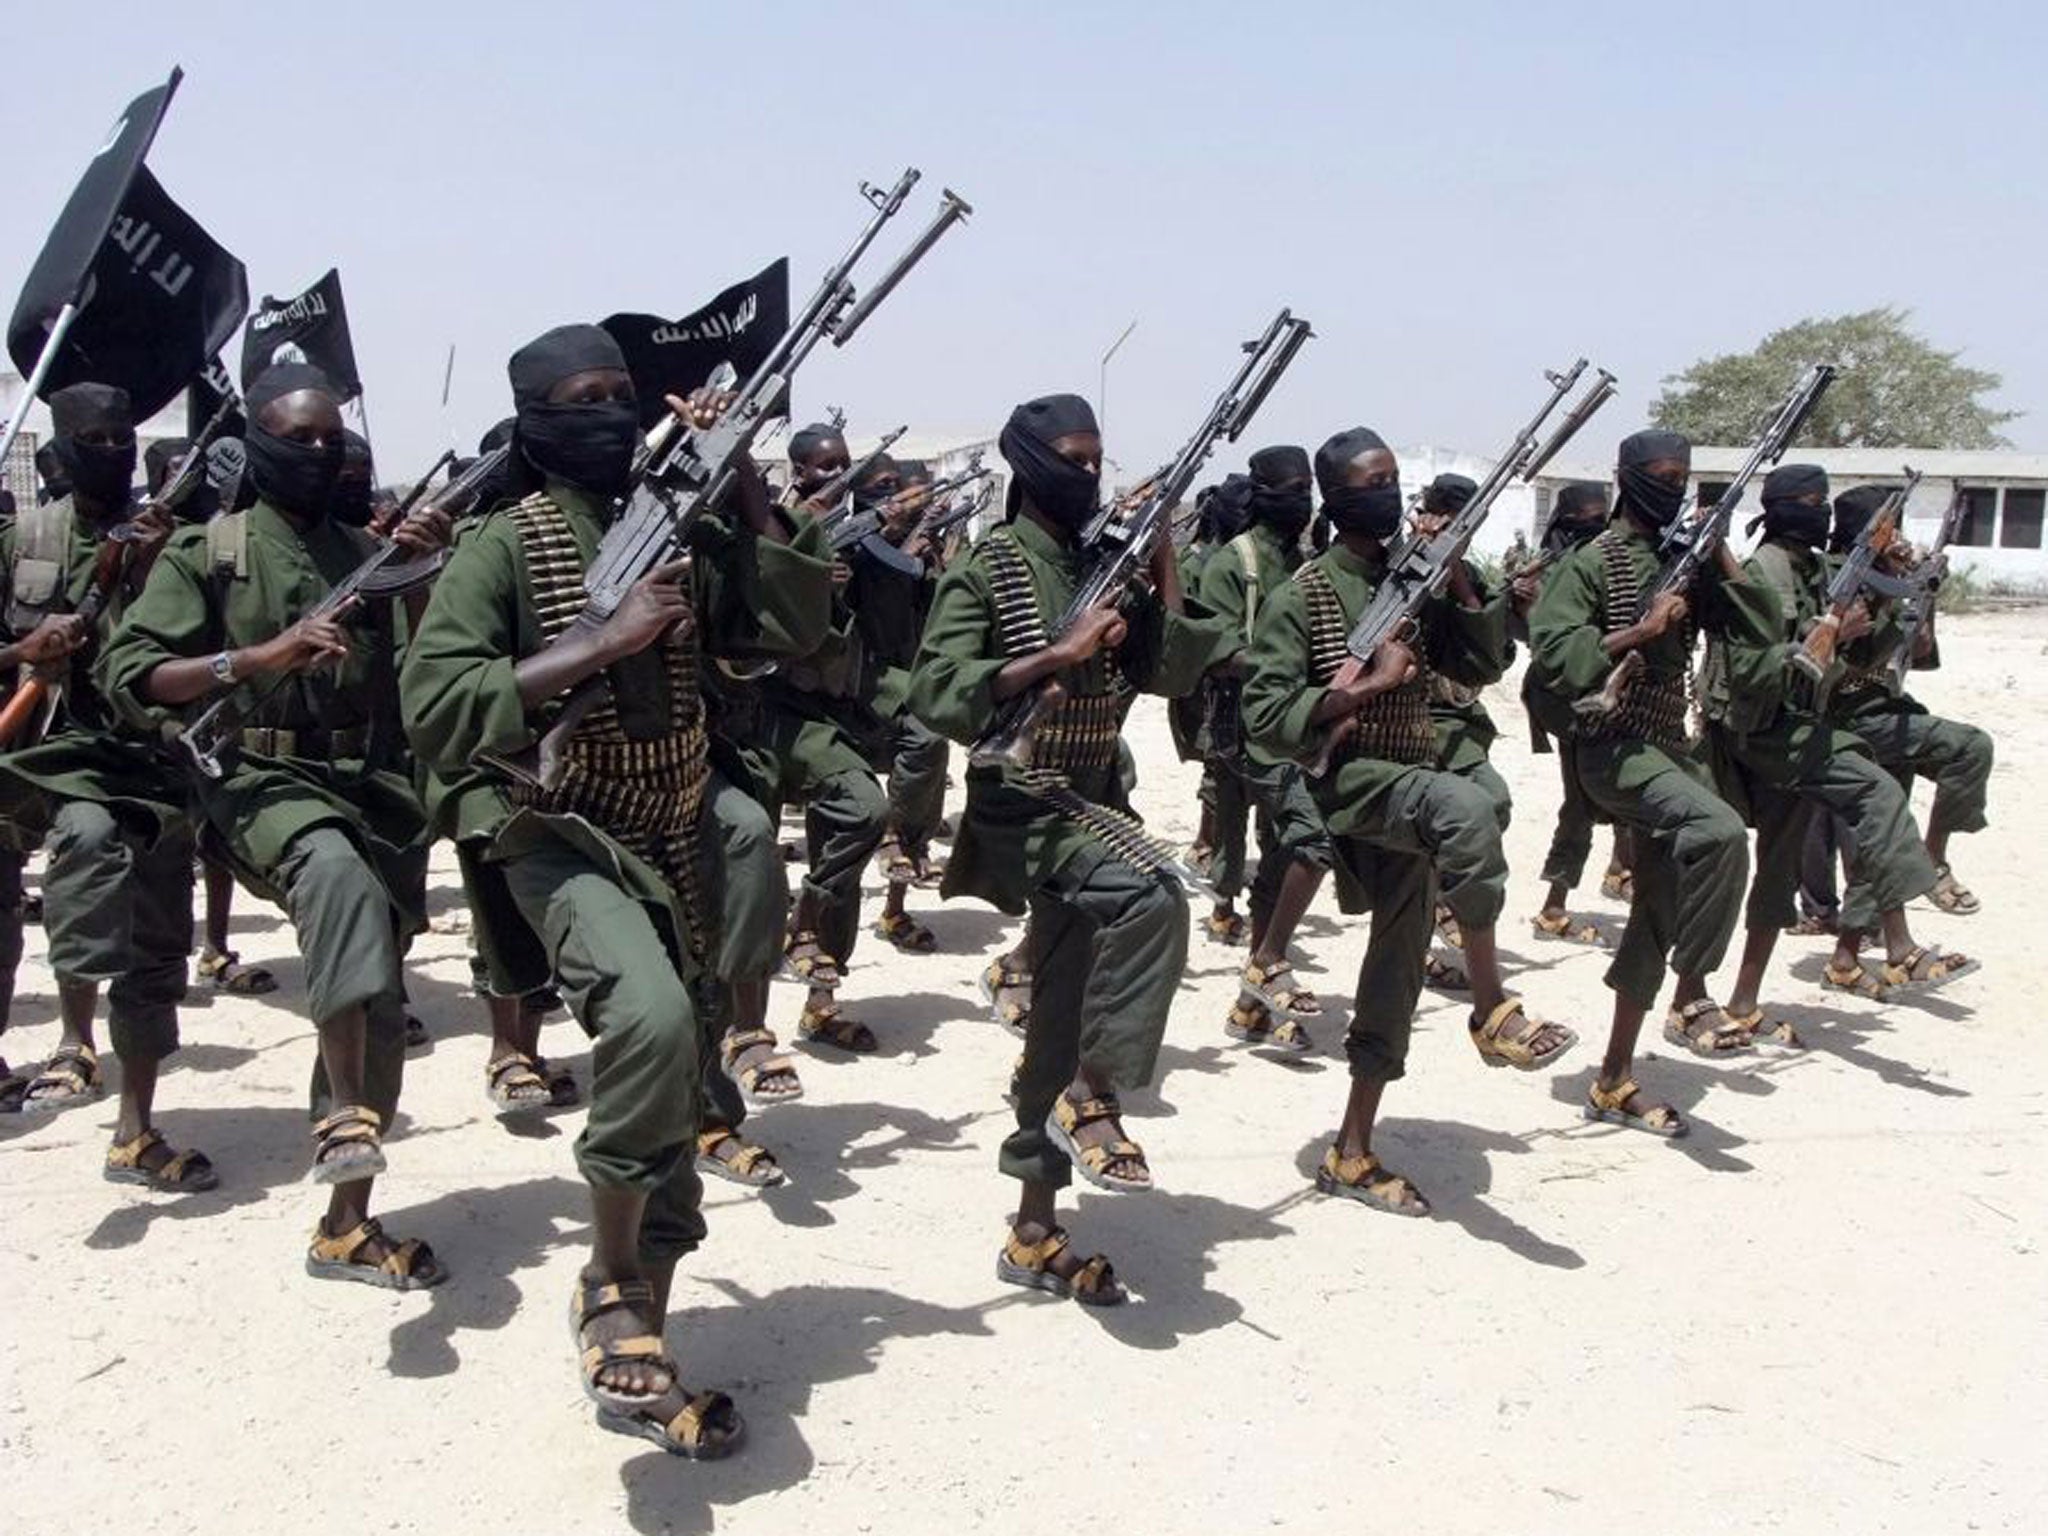 Pictured in 2011, hundreds of newly trained al-Shabaab fighters perform military exercises in the Lafofe area some 18km south of Mogadishu, in Somalia